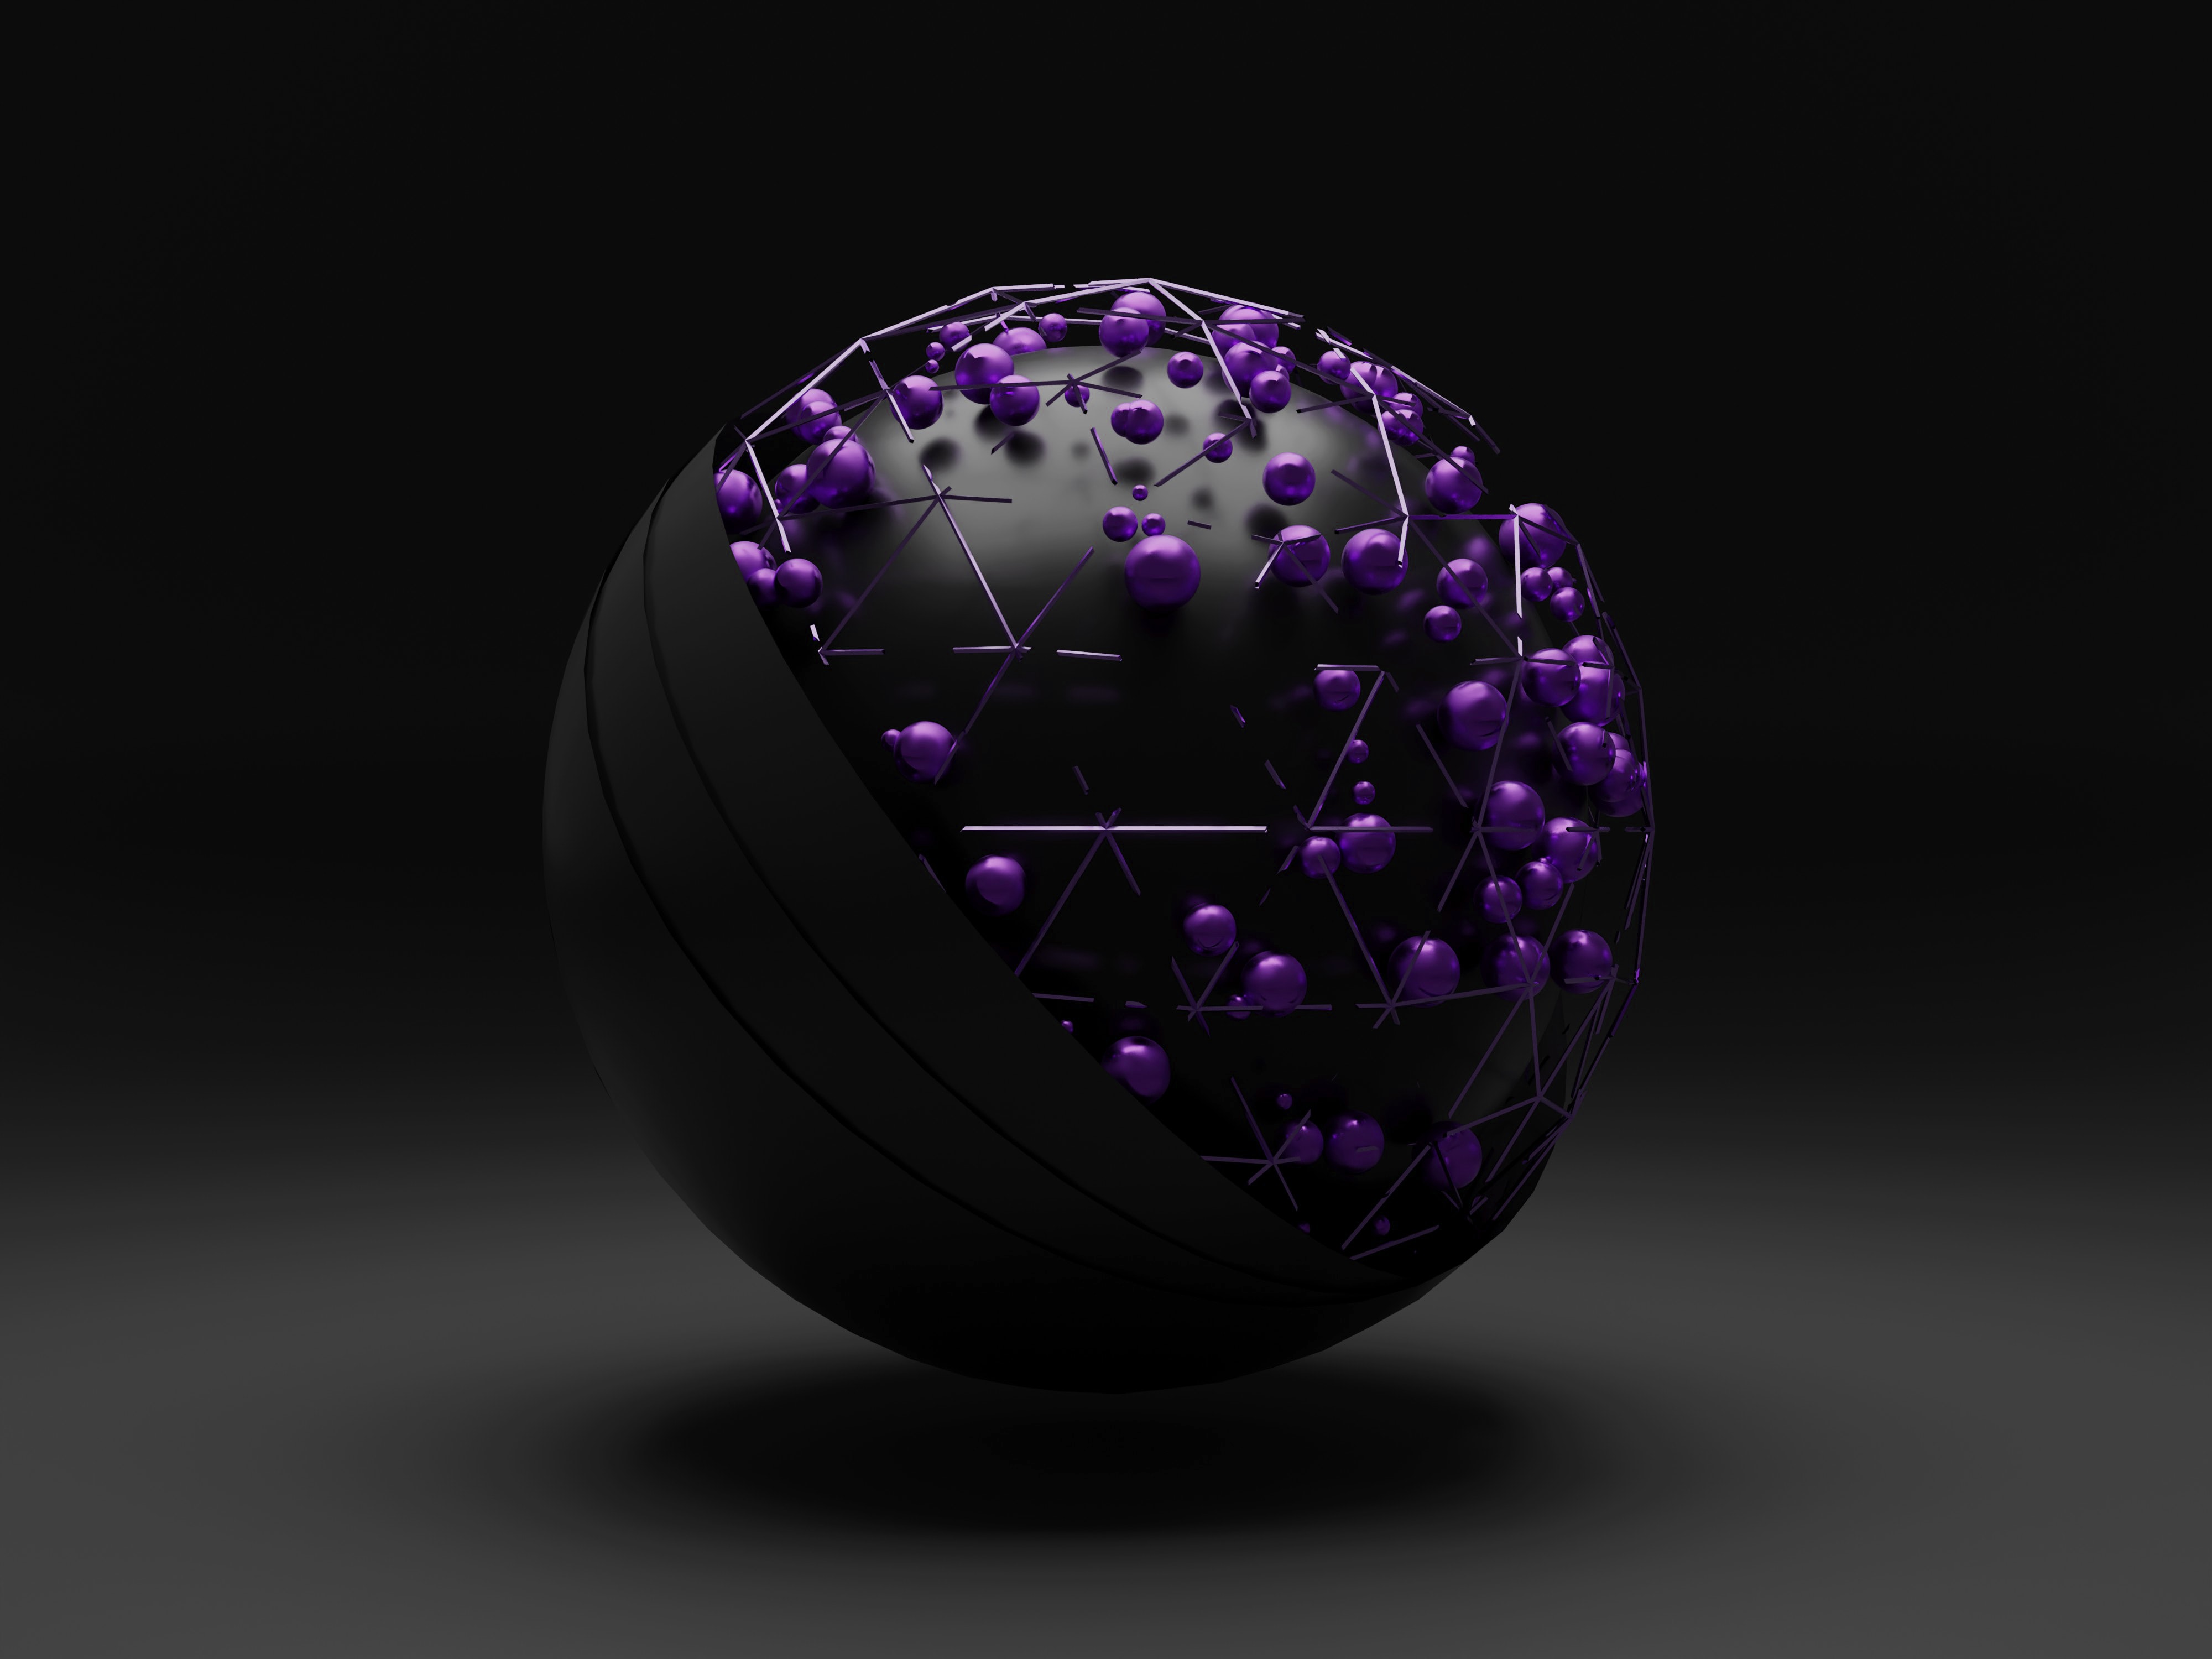 3d illustration of a sphere with lots of small purple-colored balls hovering over it.